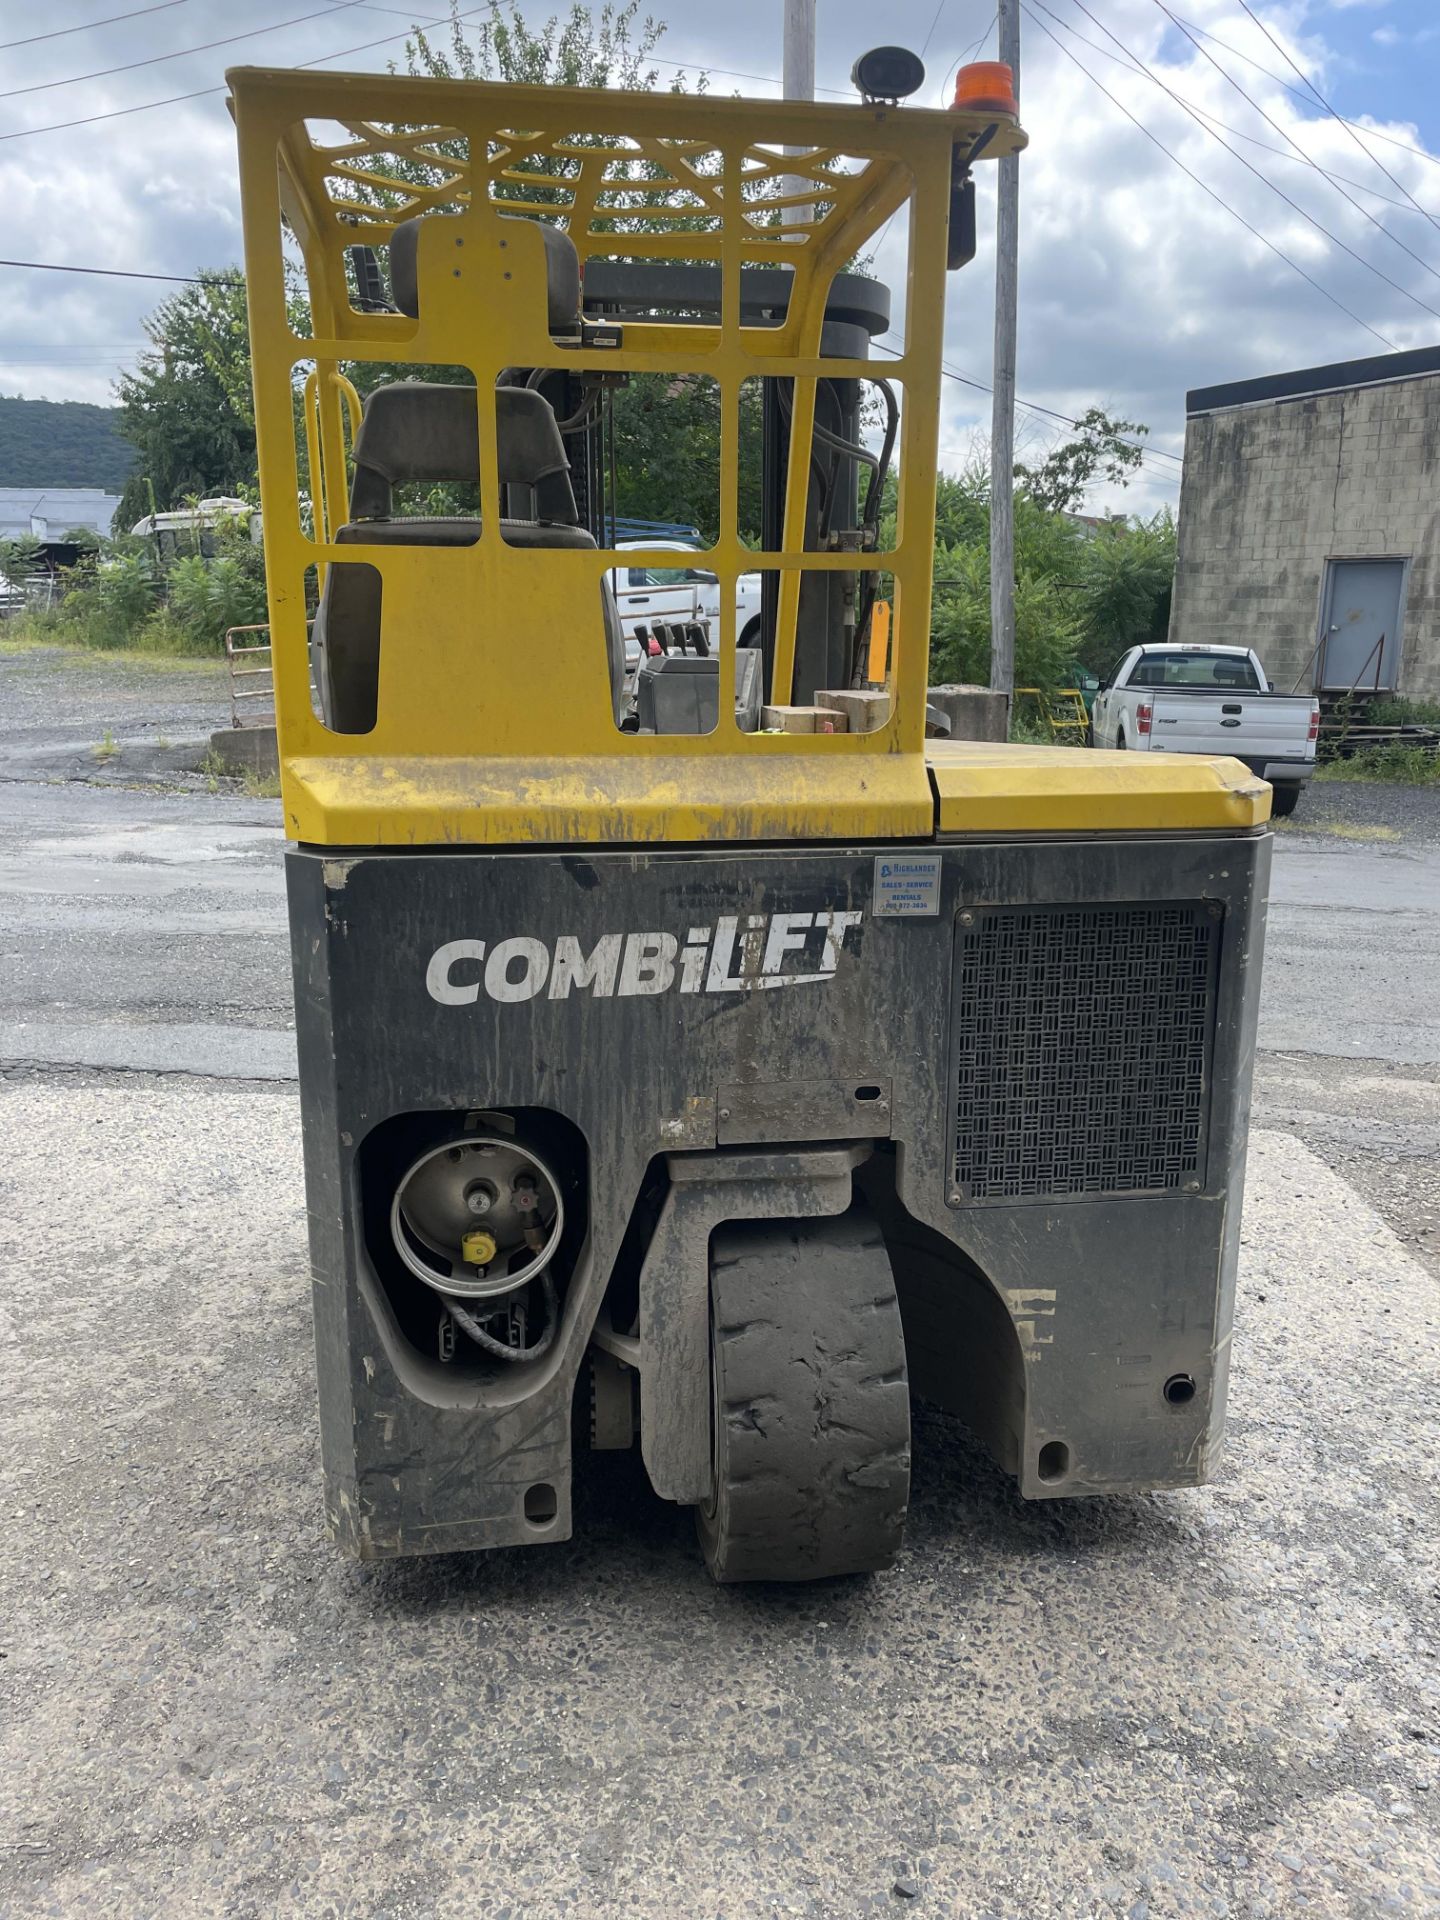 2019 Combilift CB9000 Multi Directional Forklift, Cap: 9,000 lbs w/ Kooi Reach Forks: 48" to 81" - Image 3 of 15